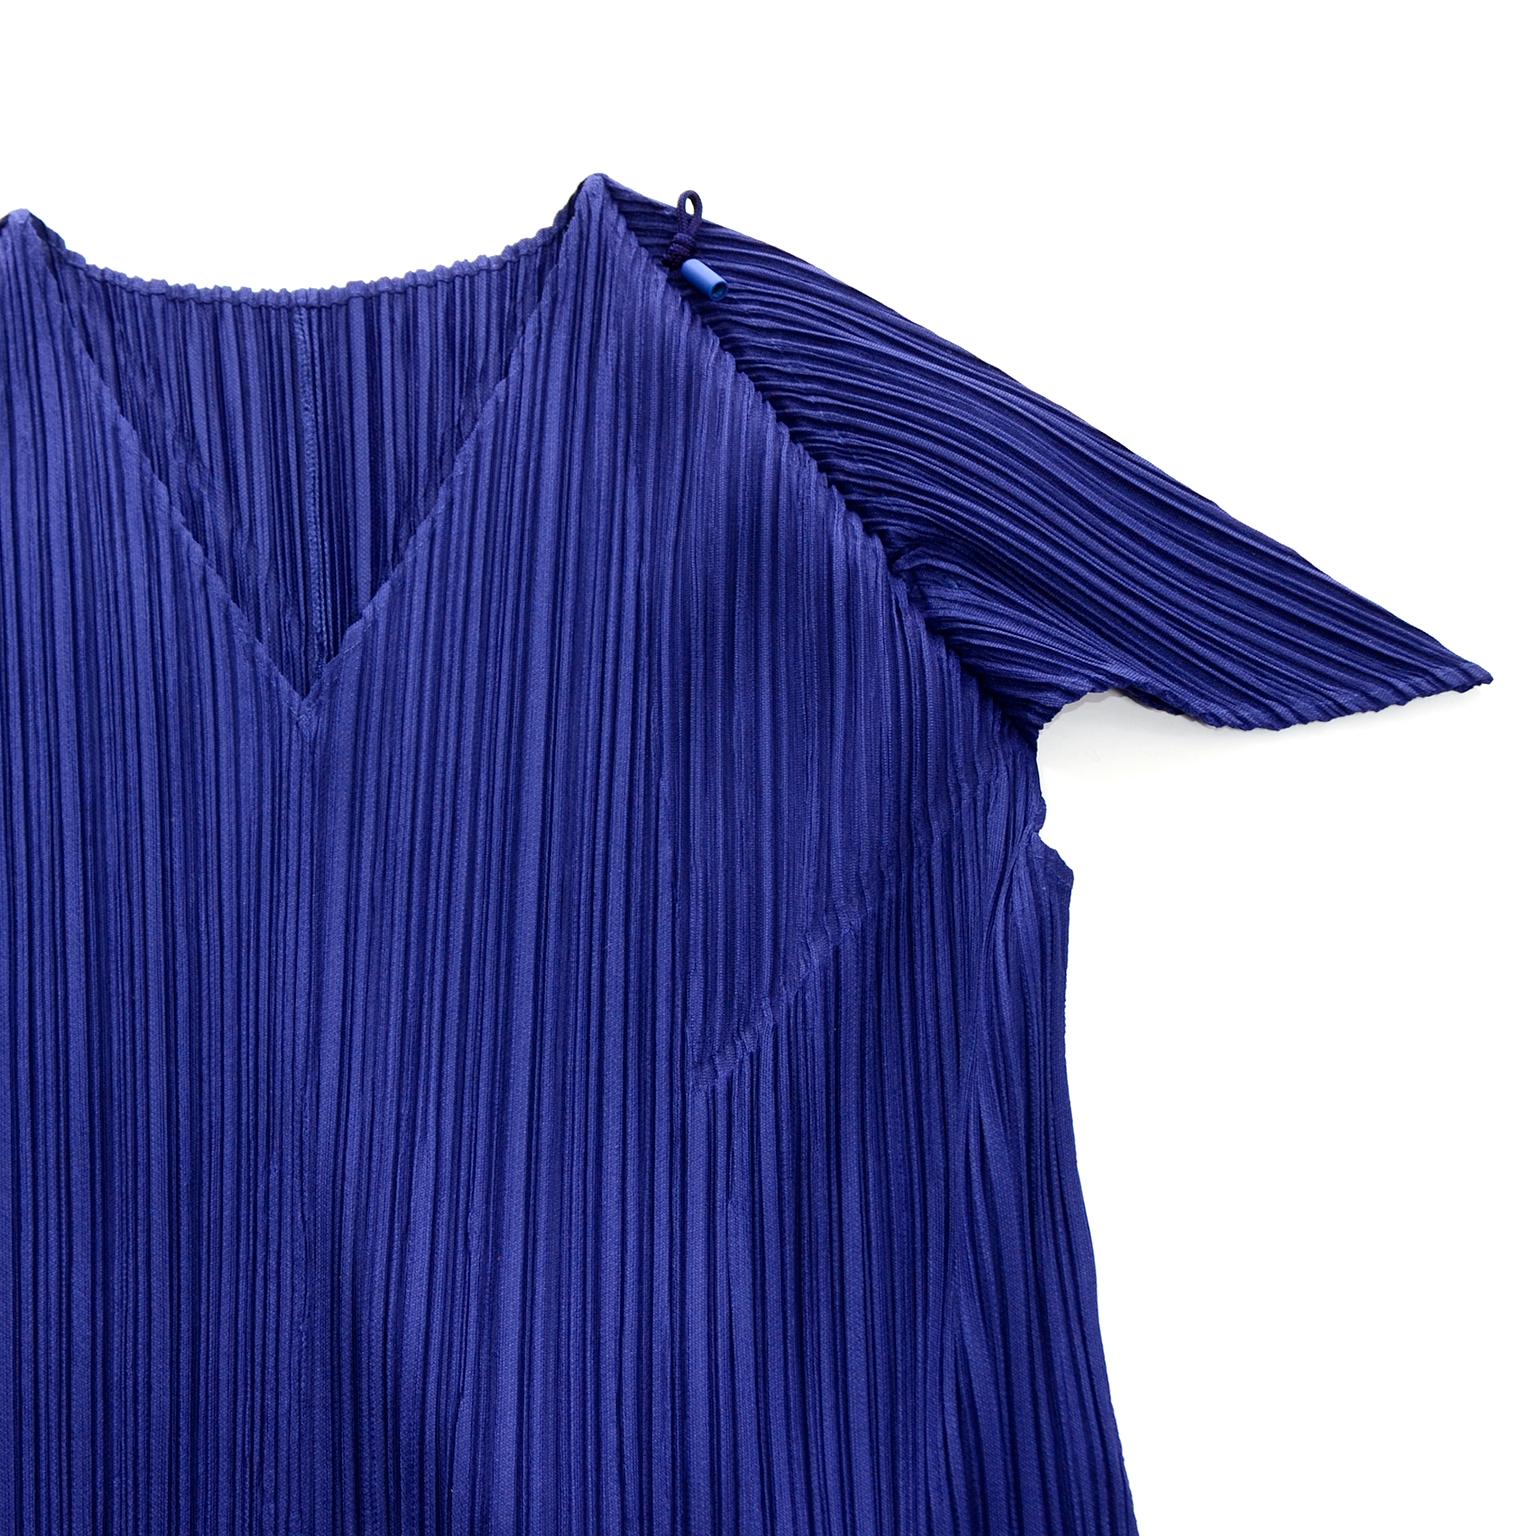 Issey Miyake Pleats Please Blue Dress & Ombre Jacket Outfit 7